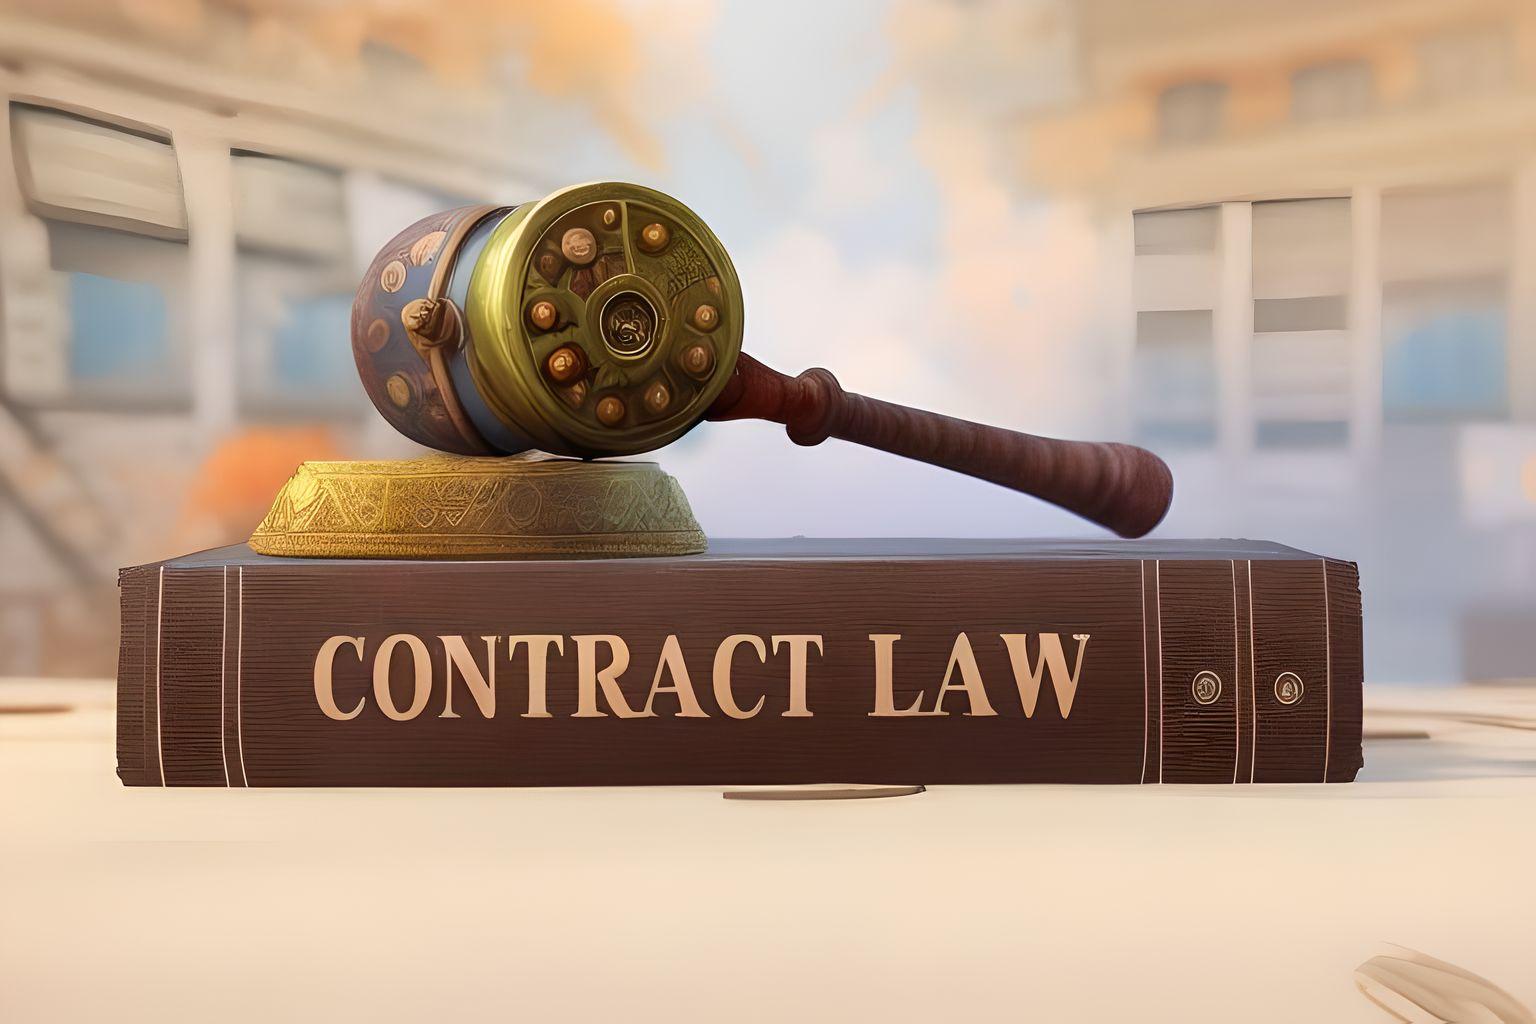 THE SUPERIOR LAWS OF CONTRACTS